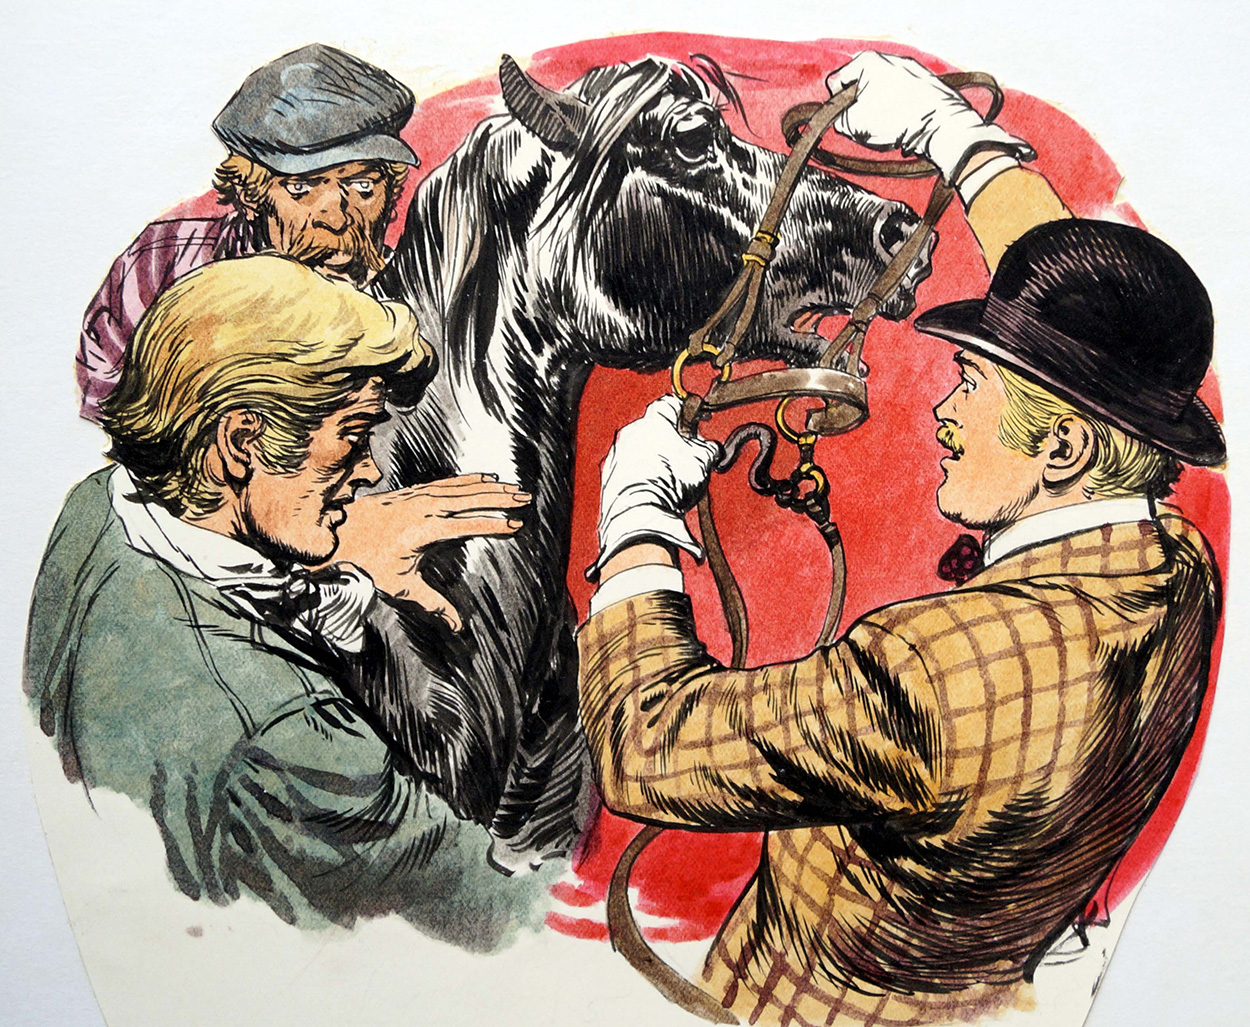 Black Beauty - Fixing The Bridle (Original) art by Black Beauty (Carlos Roume) Art at The Illustration Art Gallery